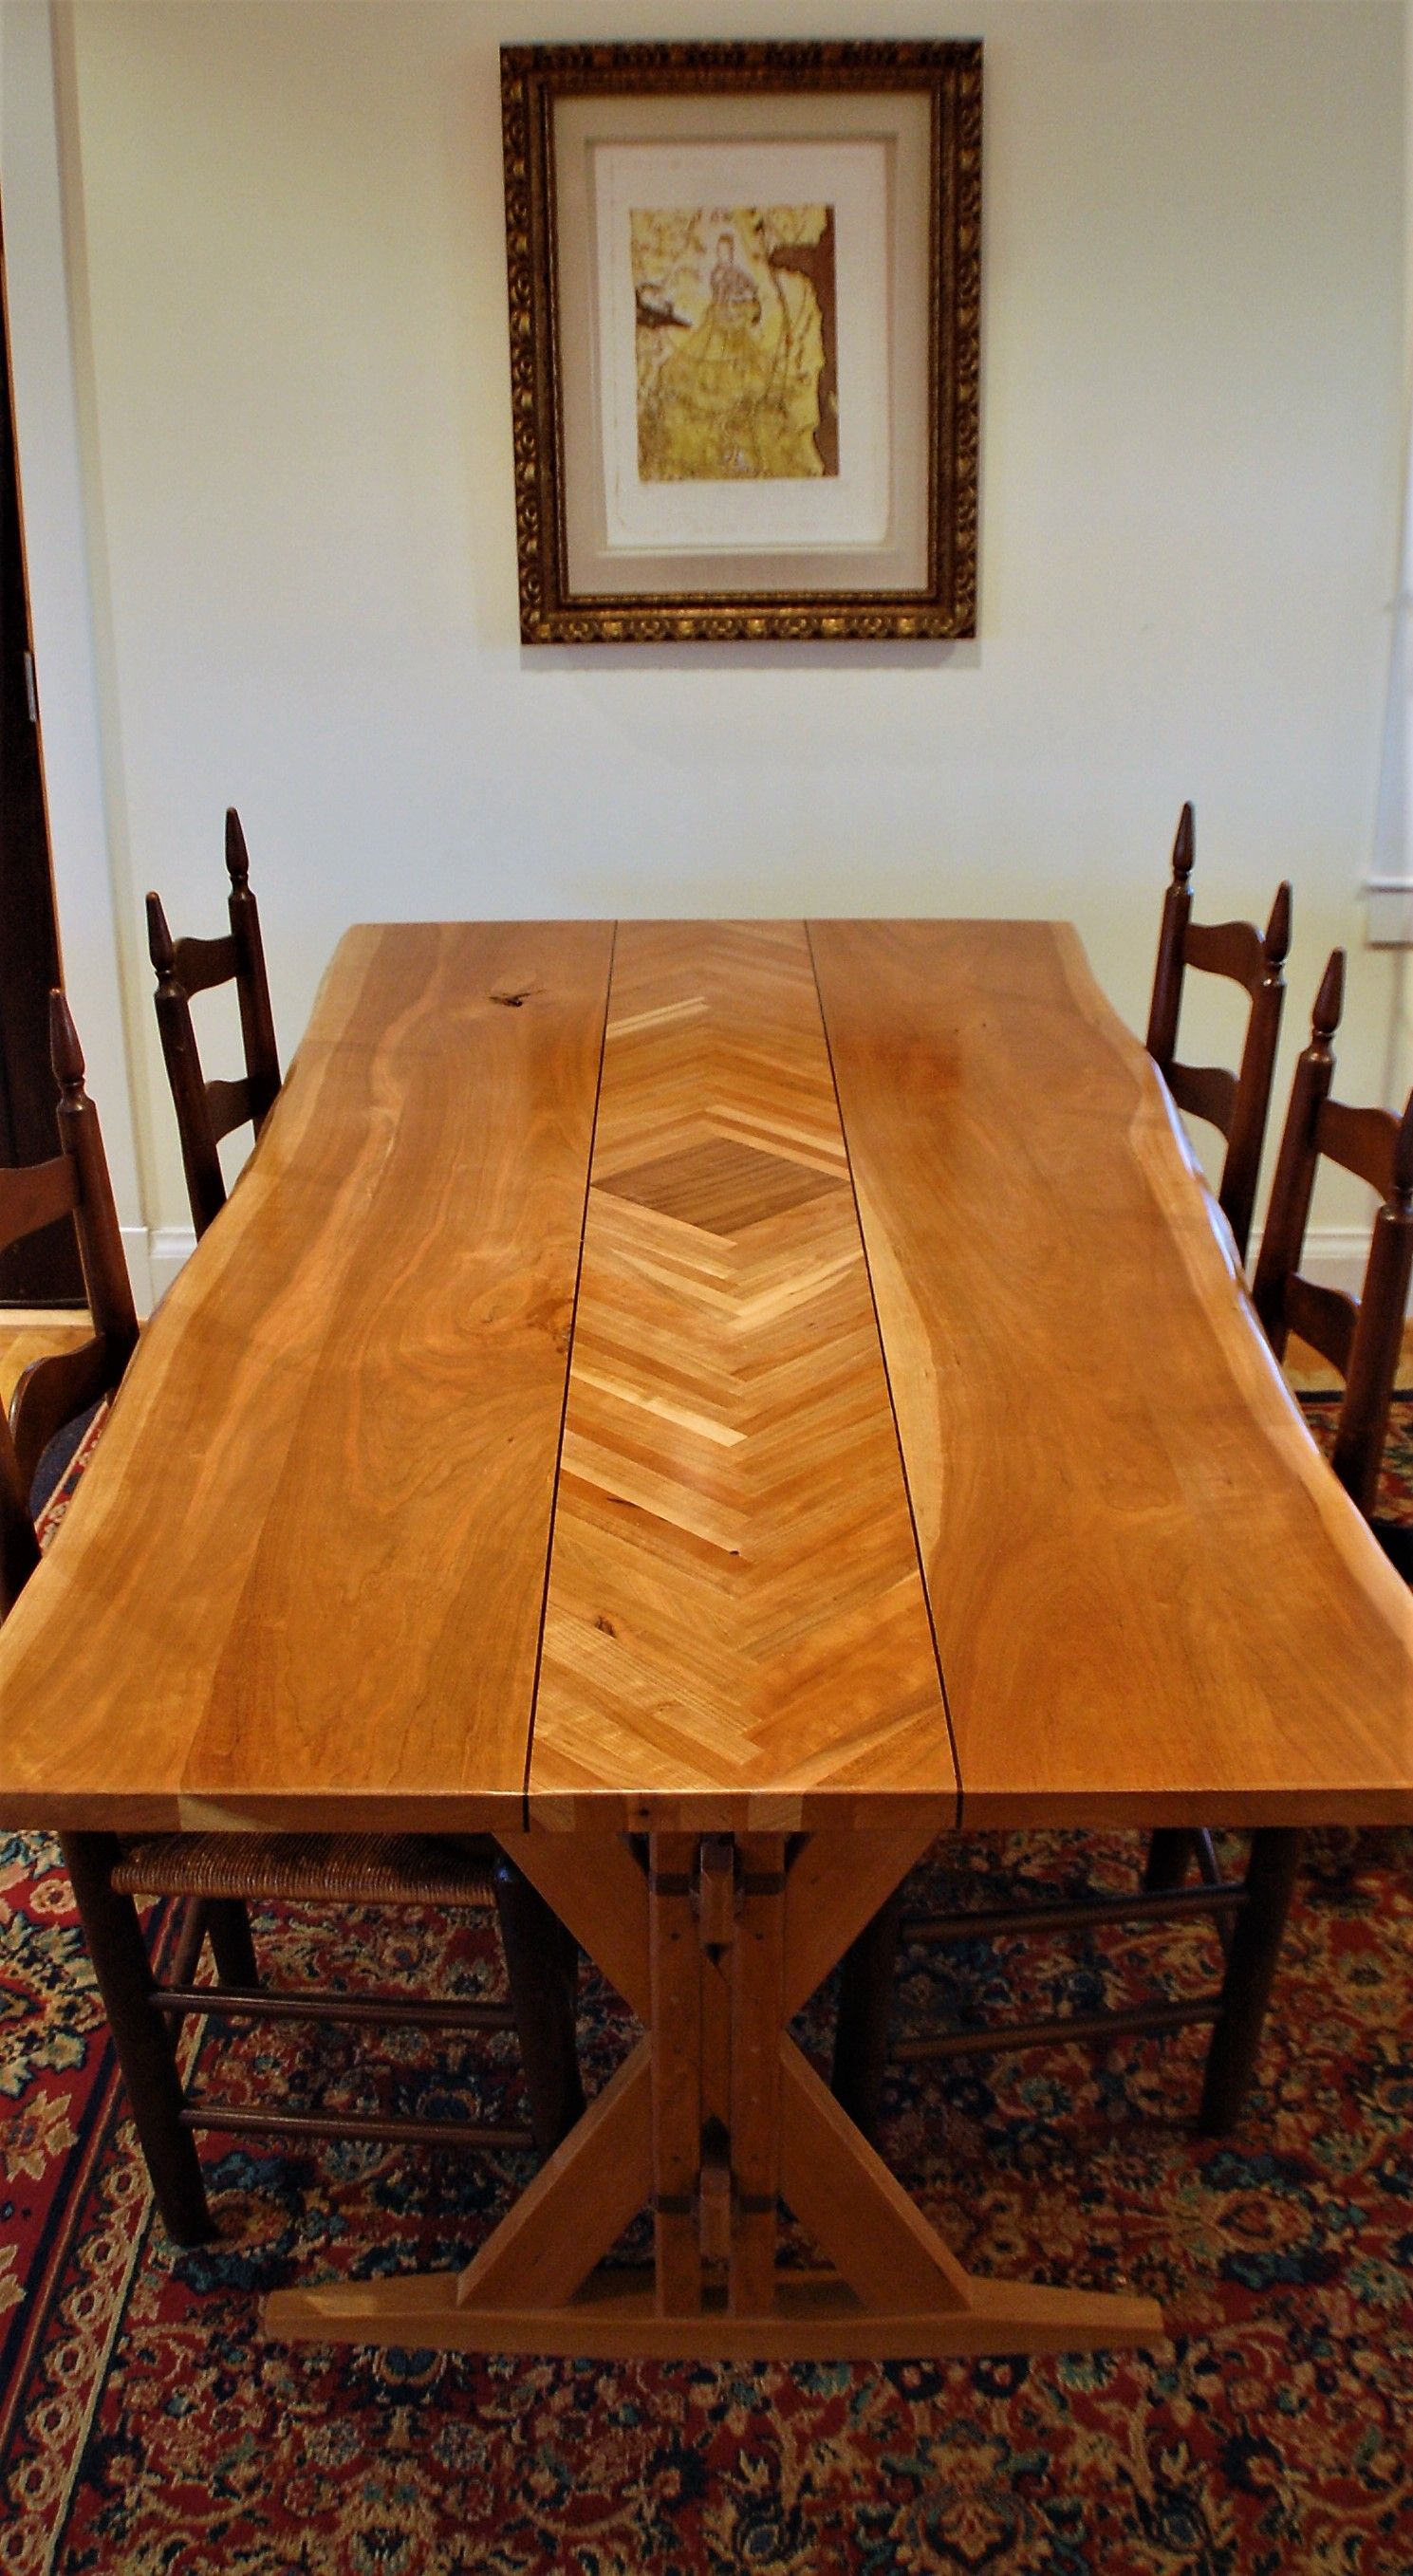 Buy a Handmade Live Edge Herringbone Dining Table, made to order from